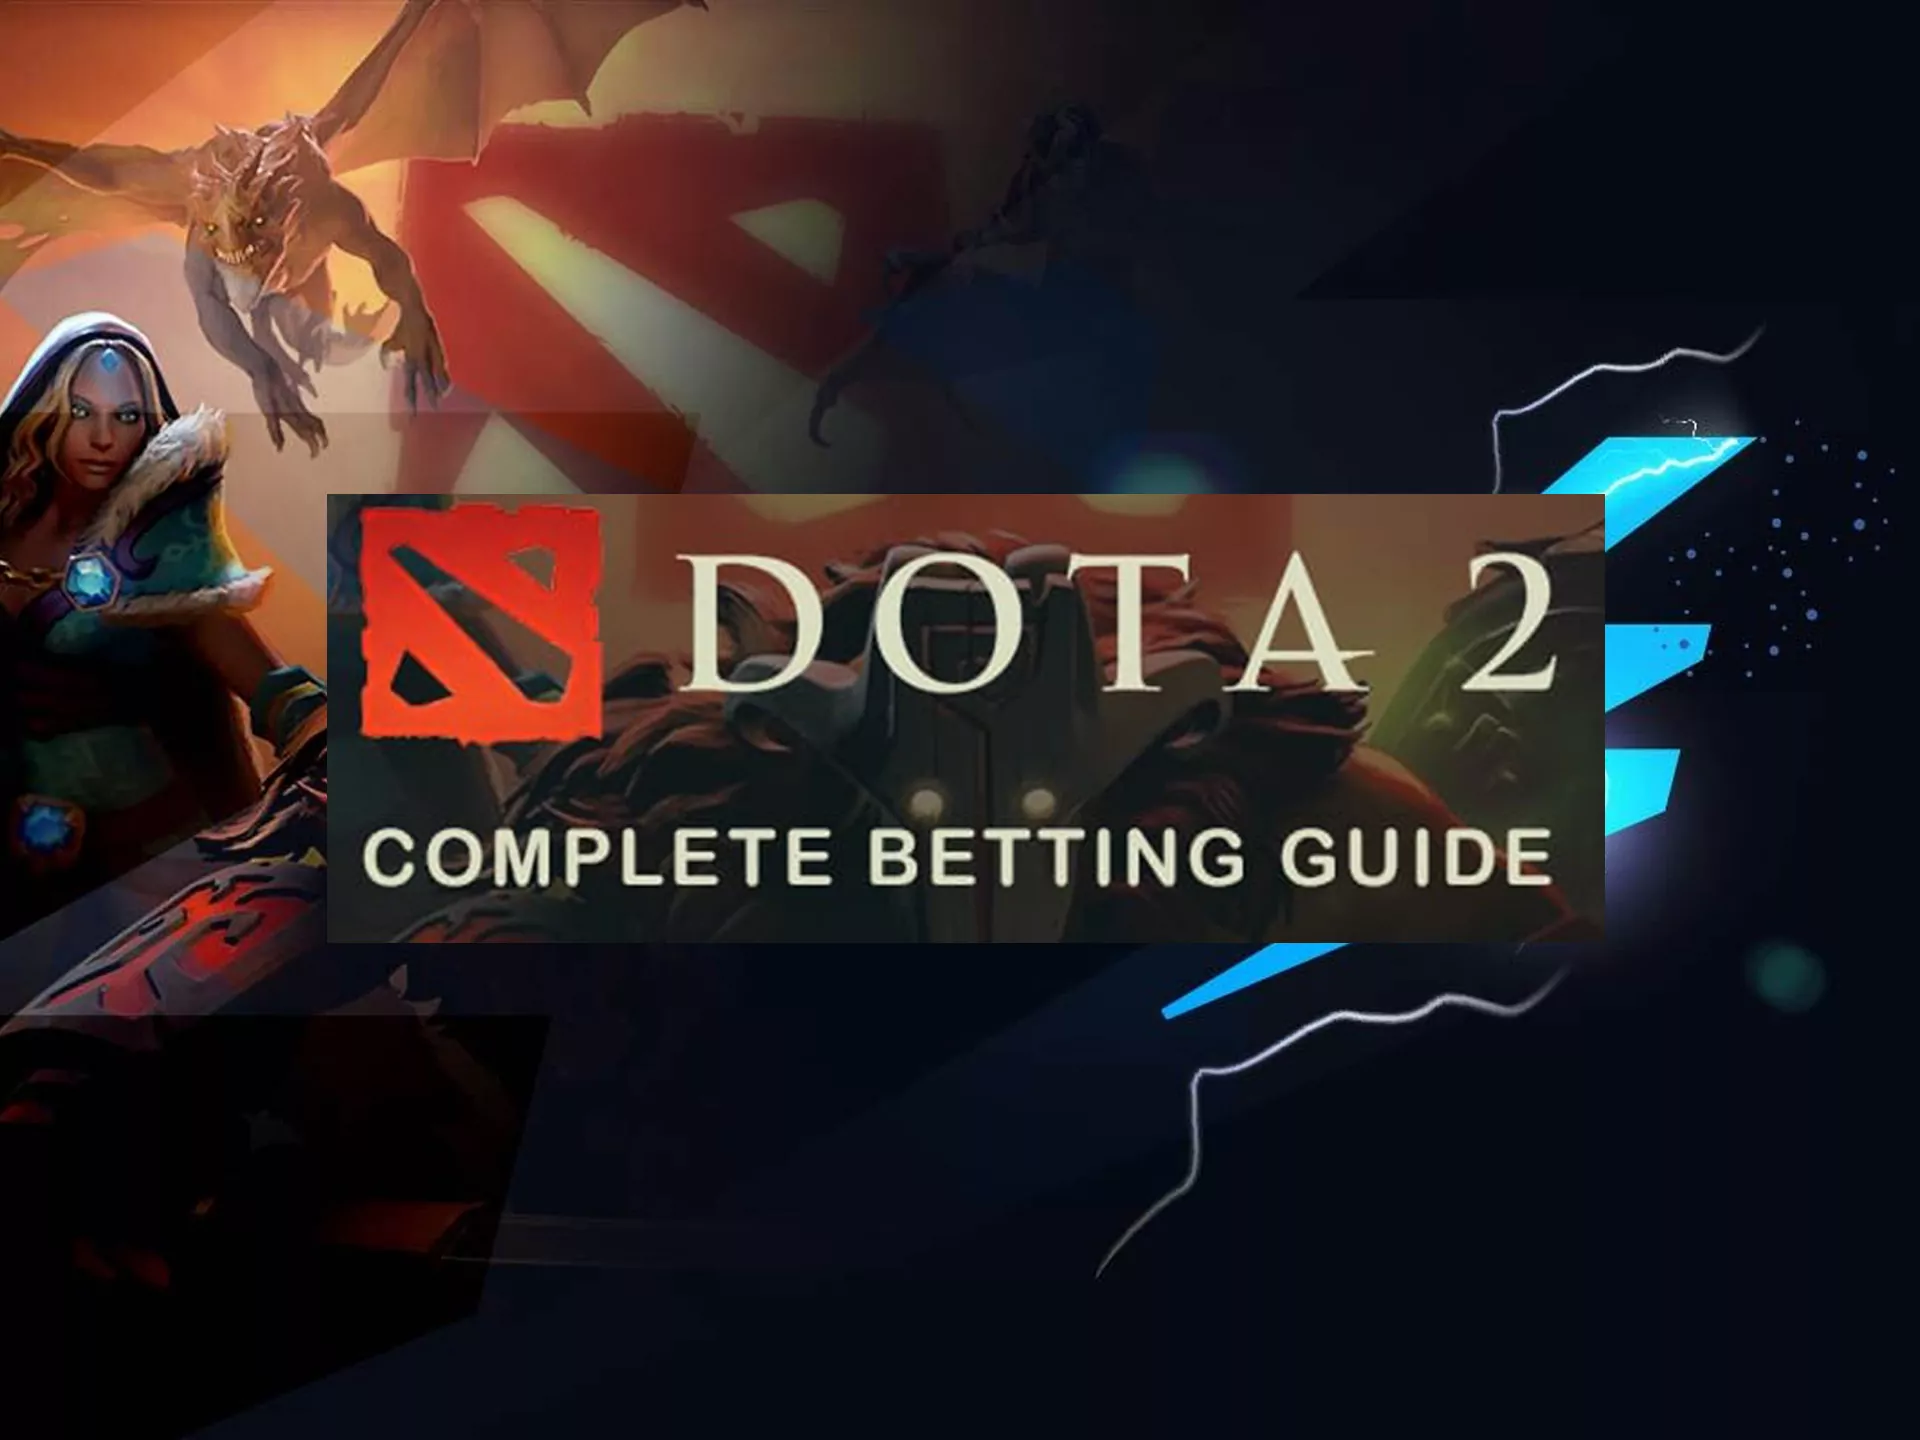 Bookmakers for betting on Dota 2.